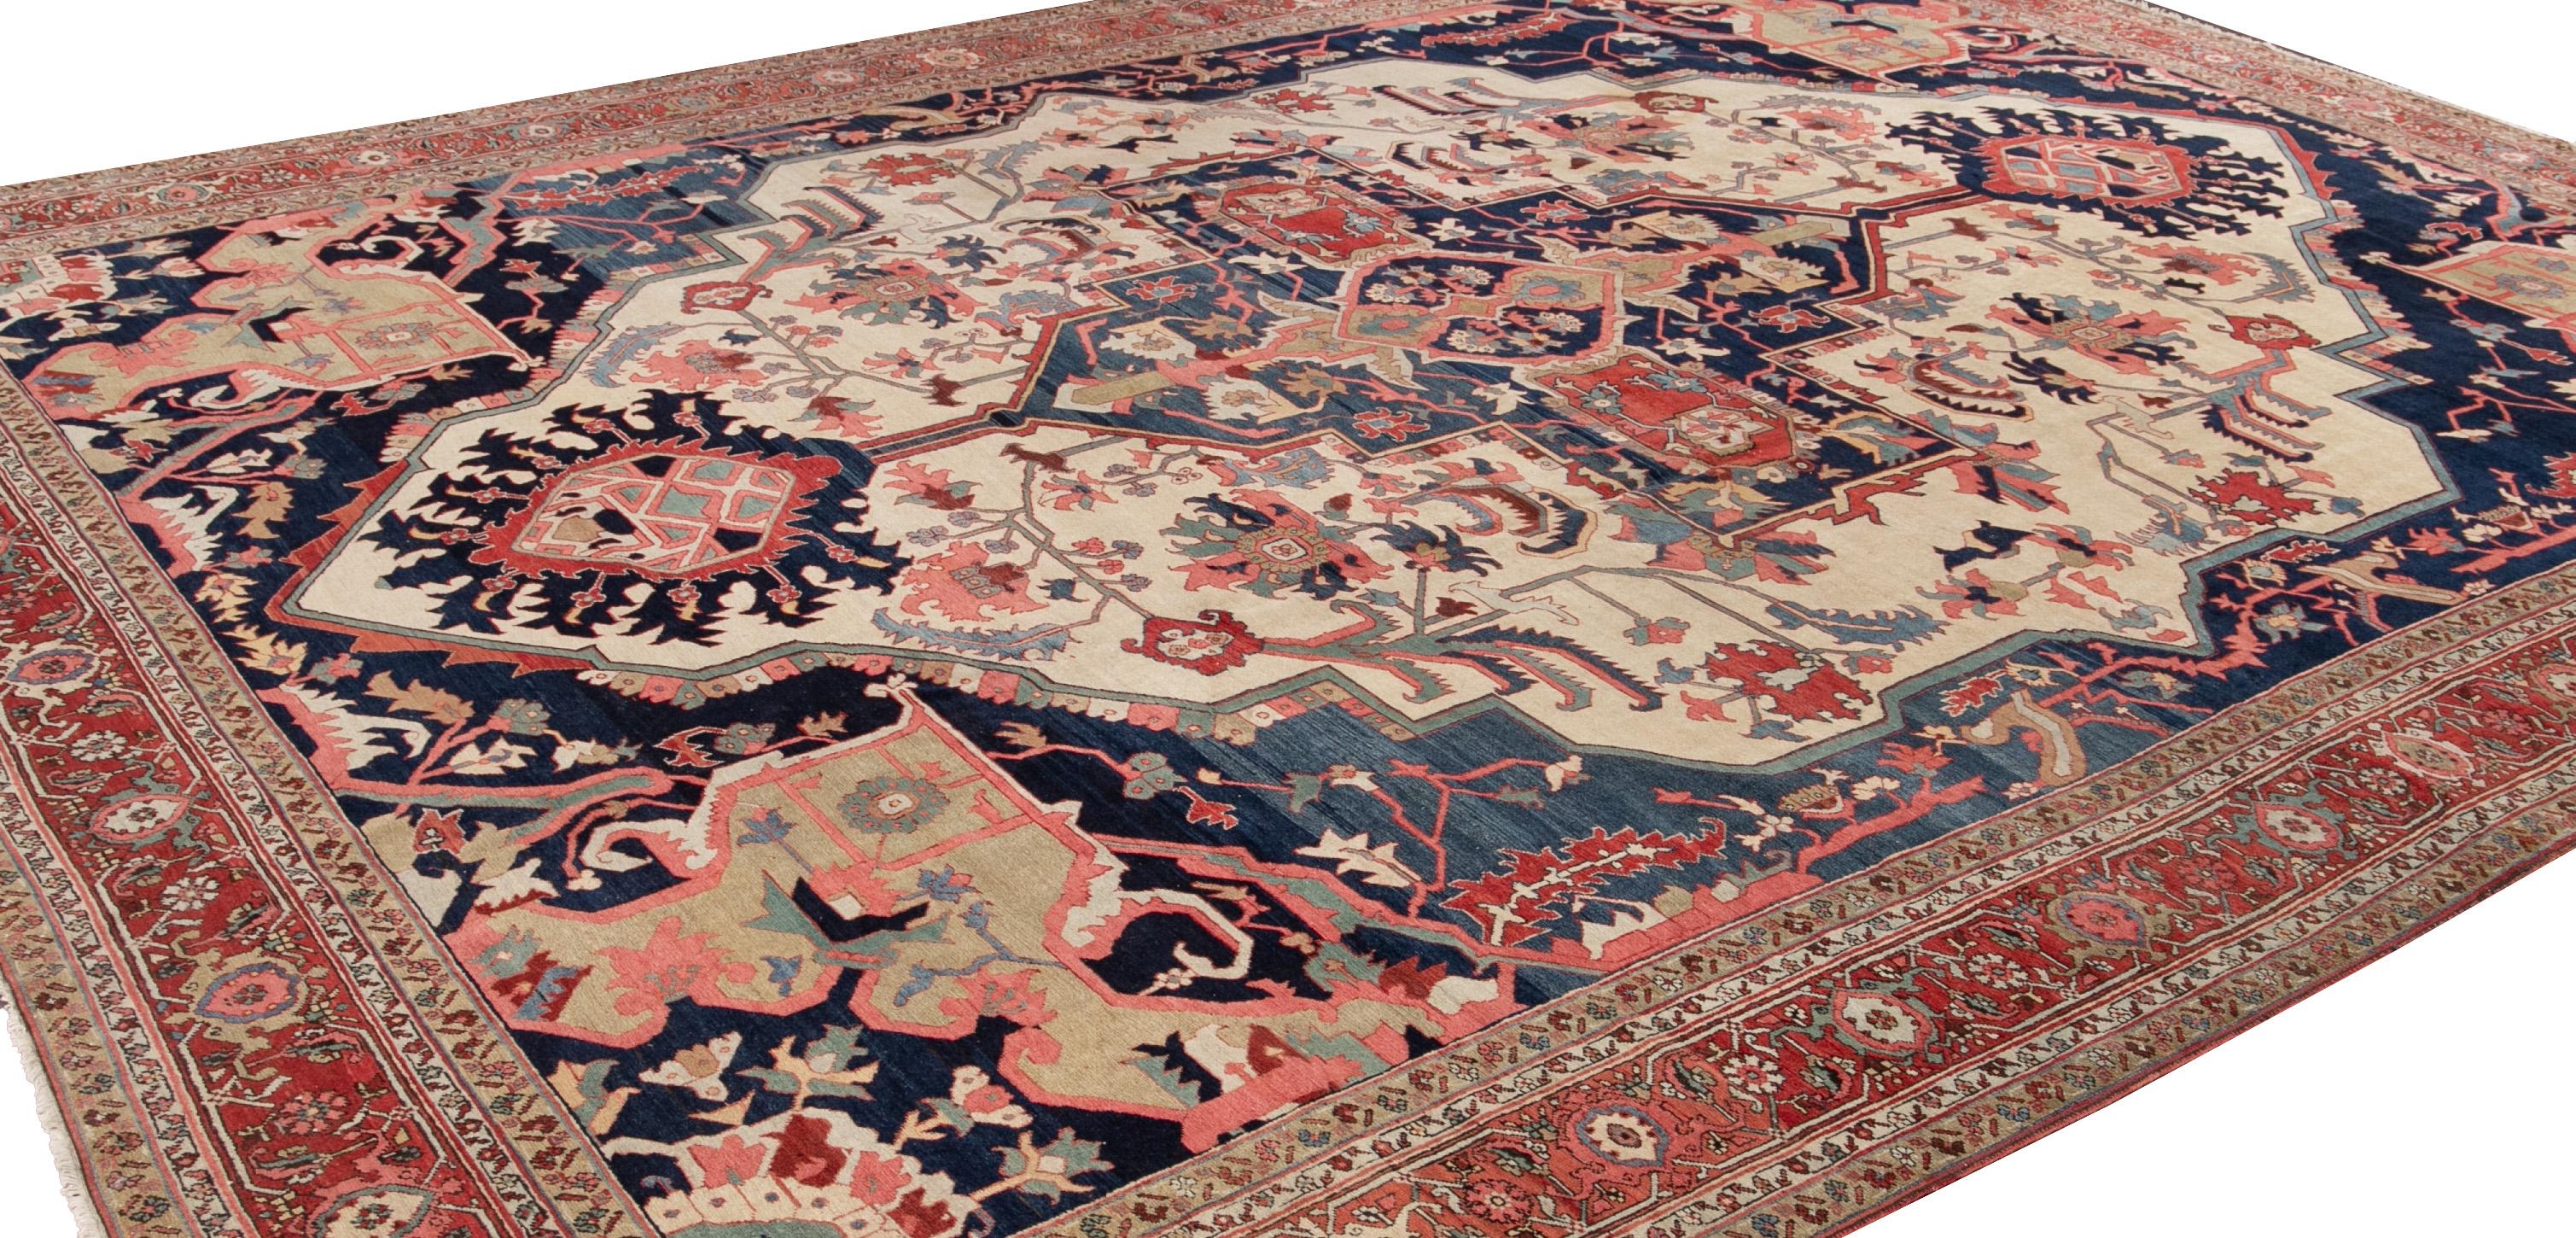 Late 19th Century Antique Serapi Persian Handmade Wool Rug For Sale 1